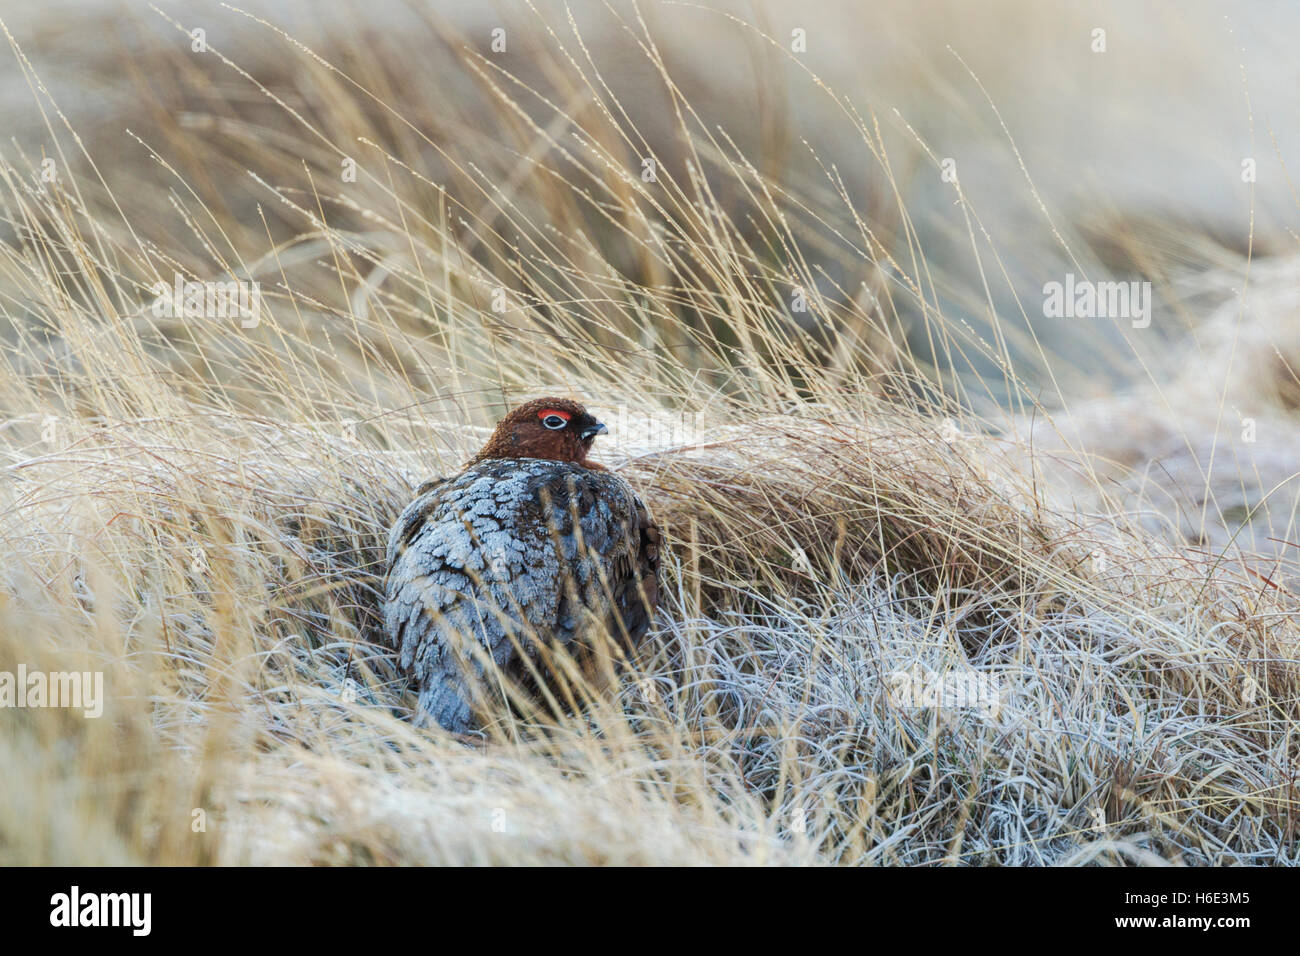 Red grouse, Latin name Lagopus lagopus scotica, among frosted rough grasses, sitting with frost on its back Stock Photo